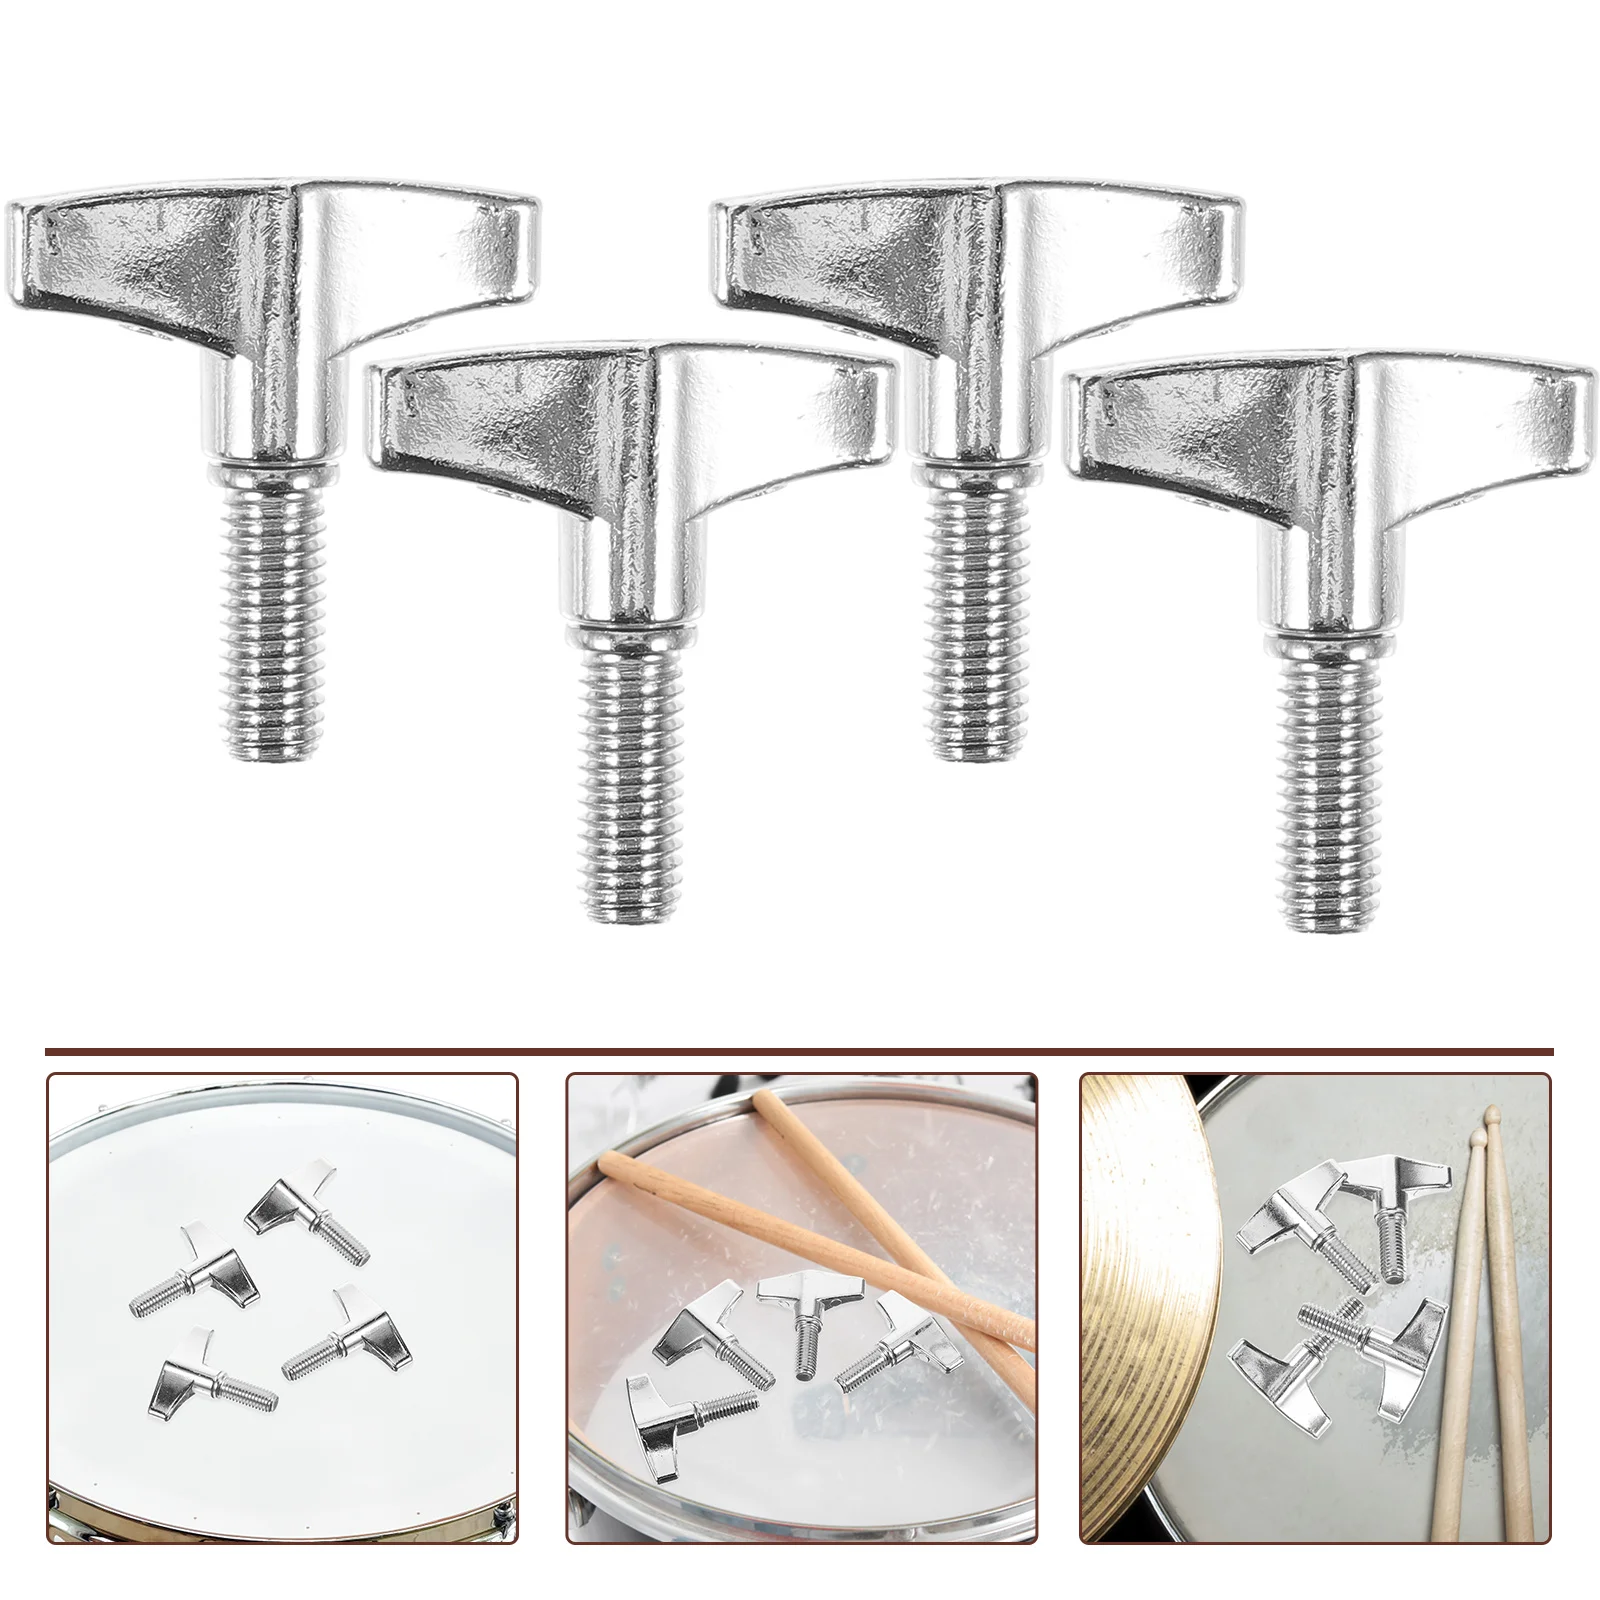 

4 Pcs Drum Cymbal Stand Wing Nut Metal Holder Percussion Instrument Parts Accessories Repairing Tool Nuts Bracket